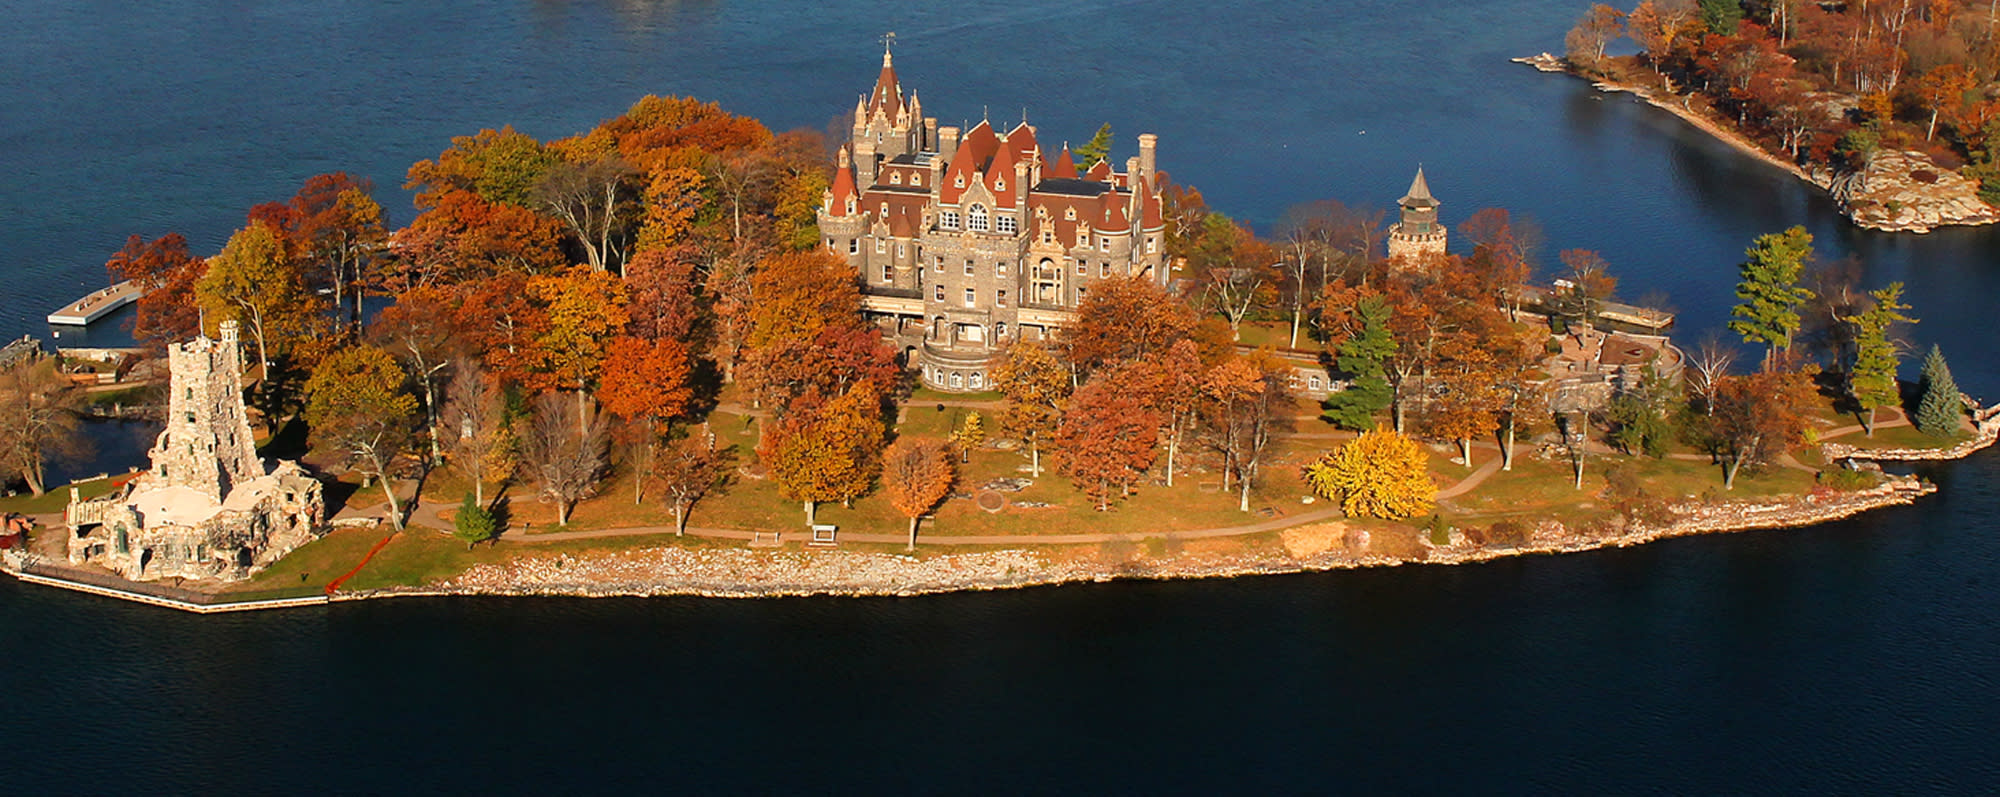 An aerial view of Boldt Castle amid fall foliage